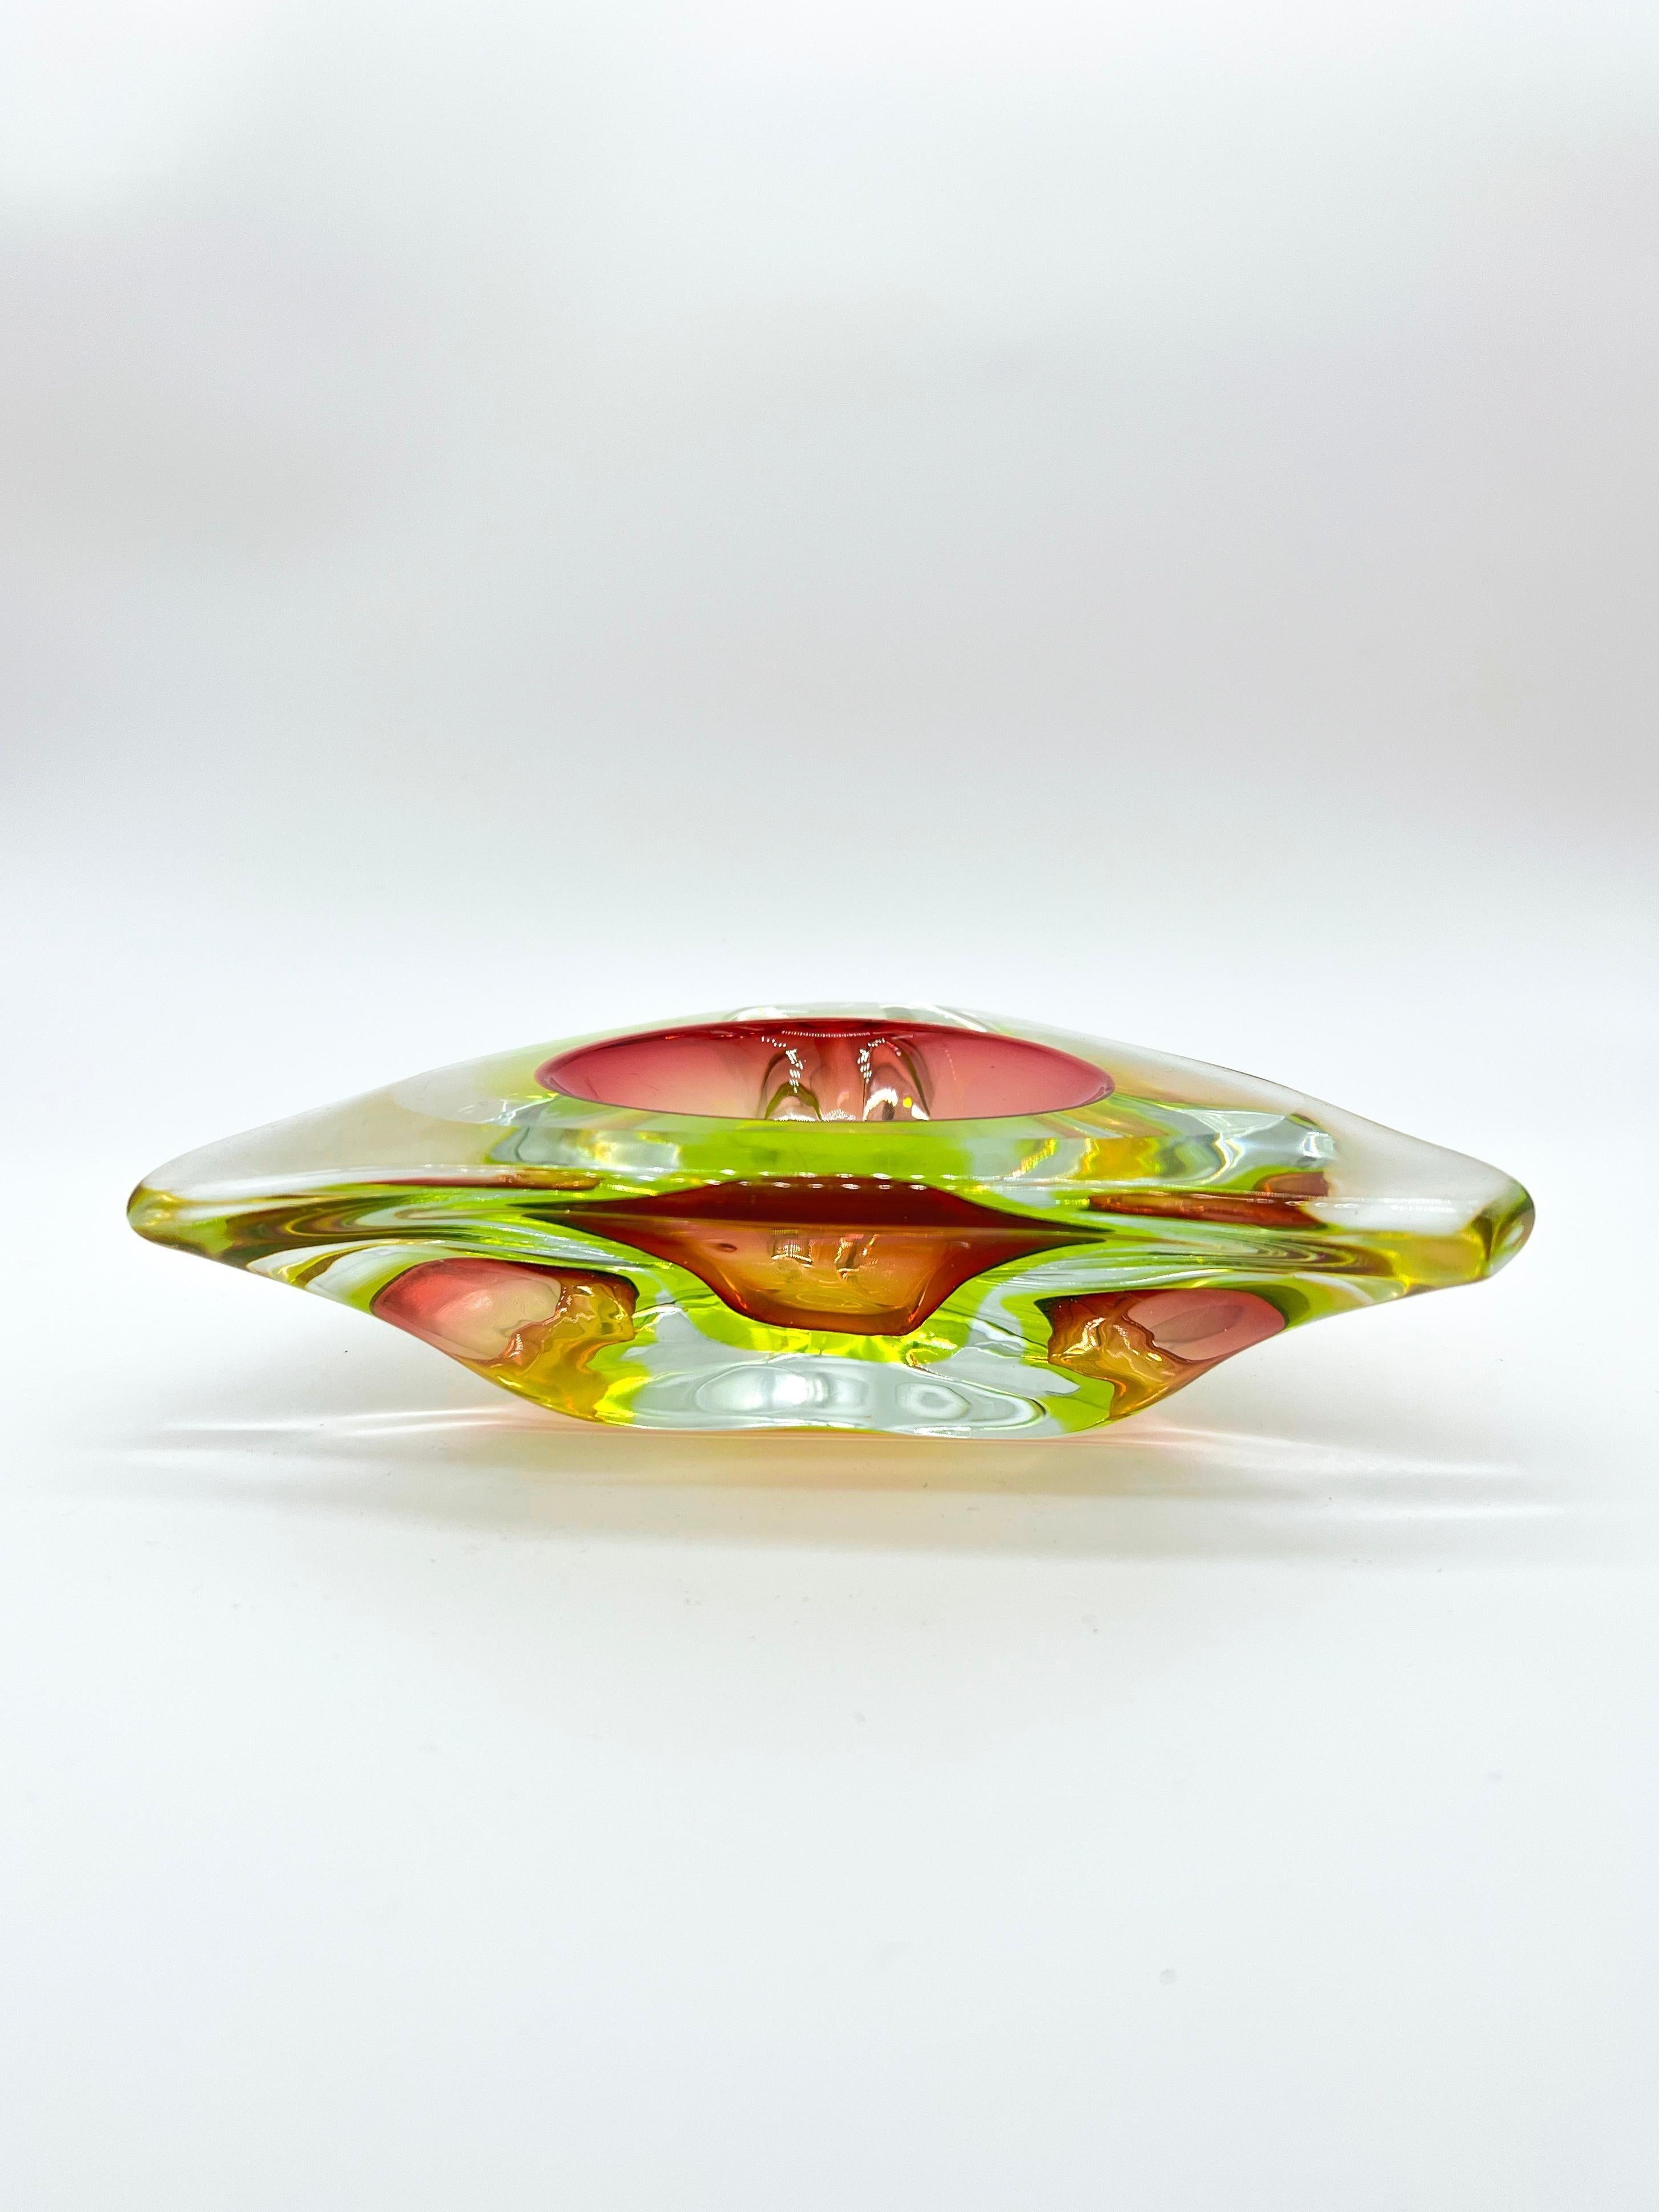 Italian Vintage Triangular Murano Accent Bowl in Red, Green and Yellow 